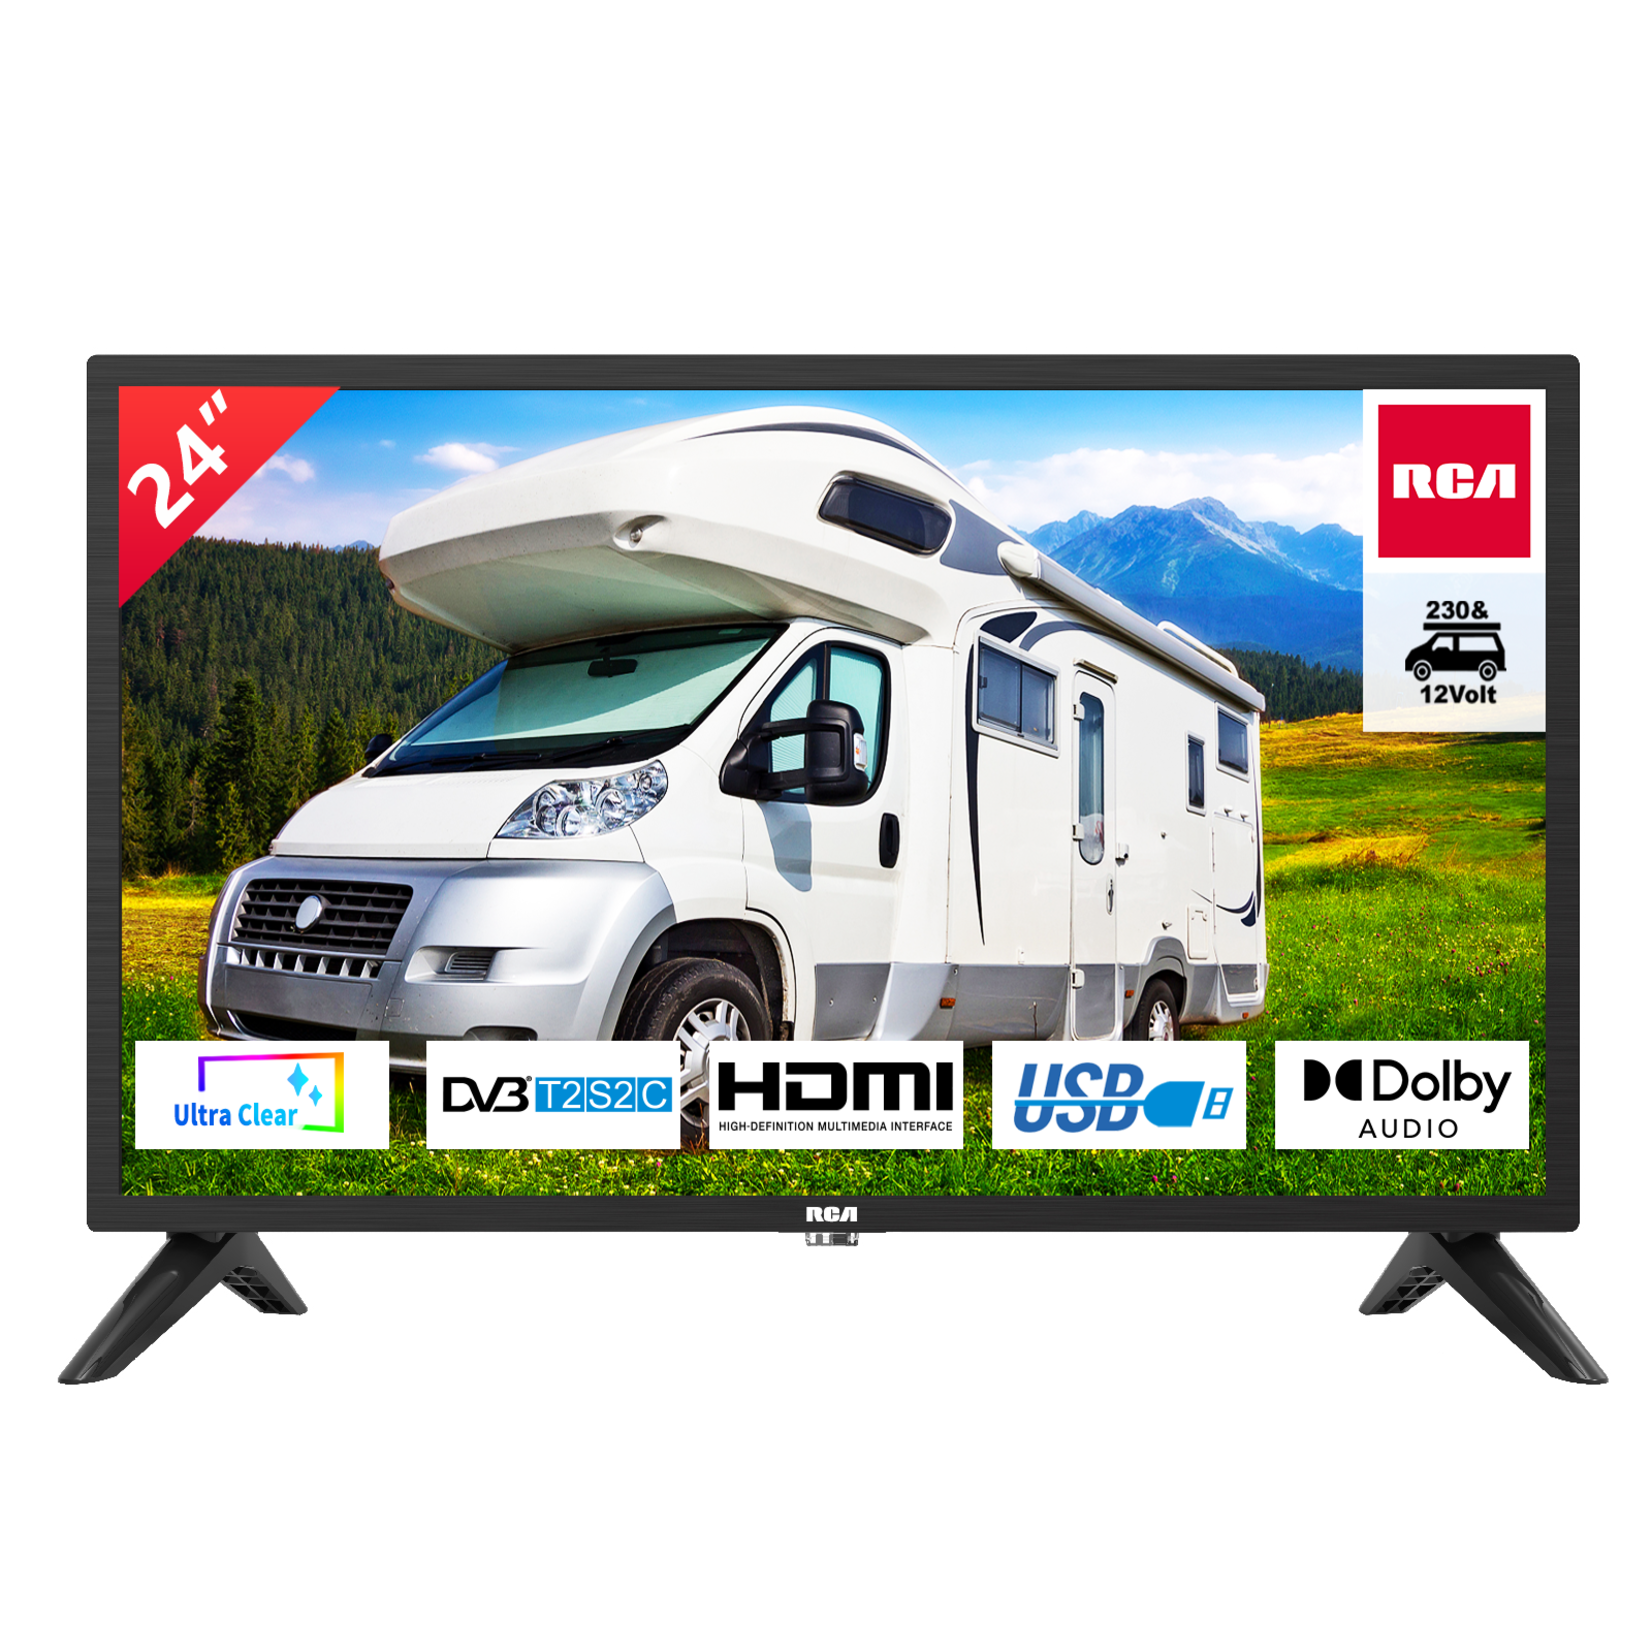 RCA RCA RB24H2CU 24 inch TV (TV 60 cm), for mobile homes and caravans 12V car adapter, Dolby Audio, triple tuner DVB-C/T2/S2, VGA PC connection, HDMI, USB, digital audio output, including hotel mode